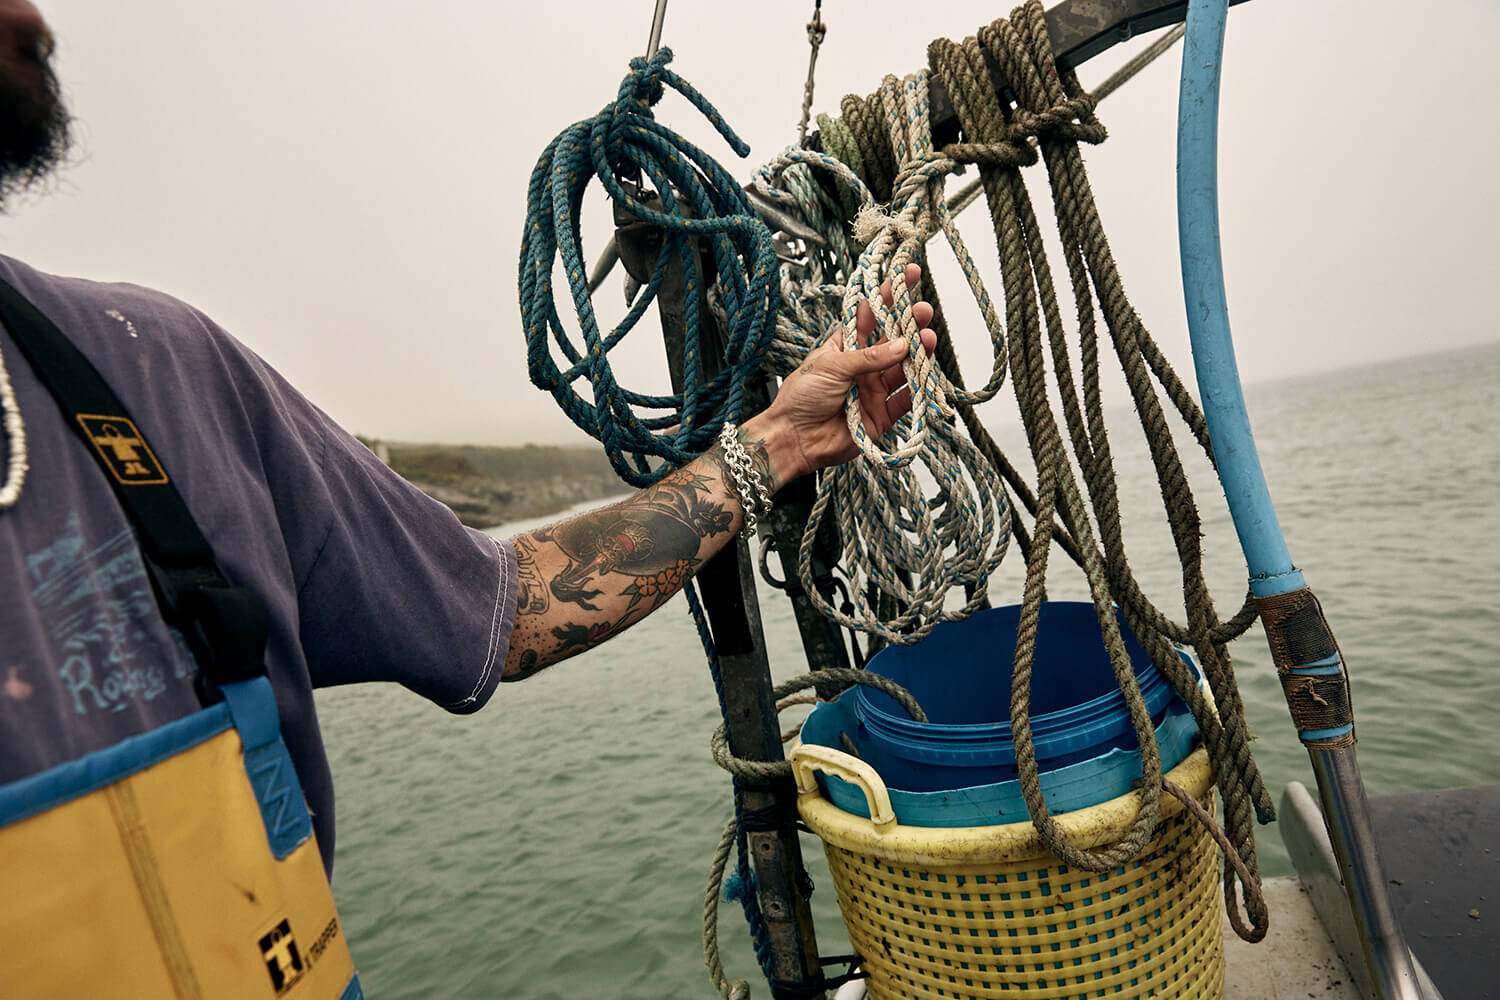 colour photo of fisherman's tattooed arm holding ropes on a boat. 